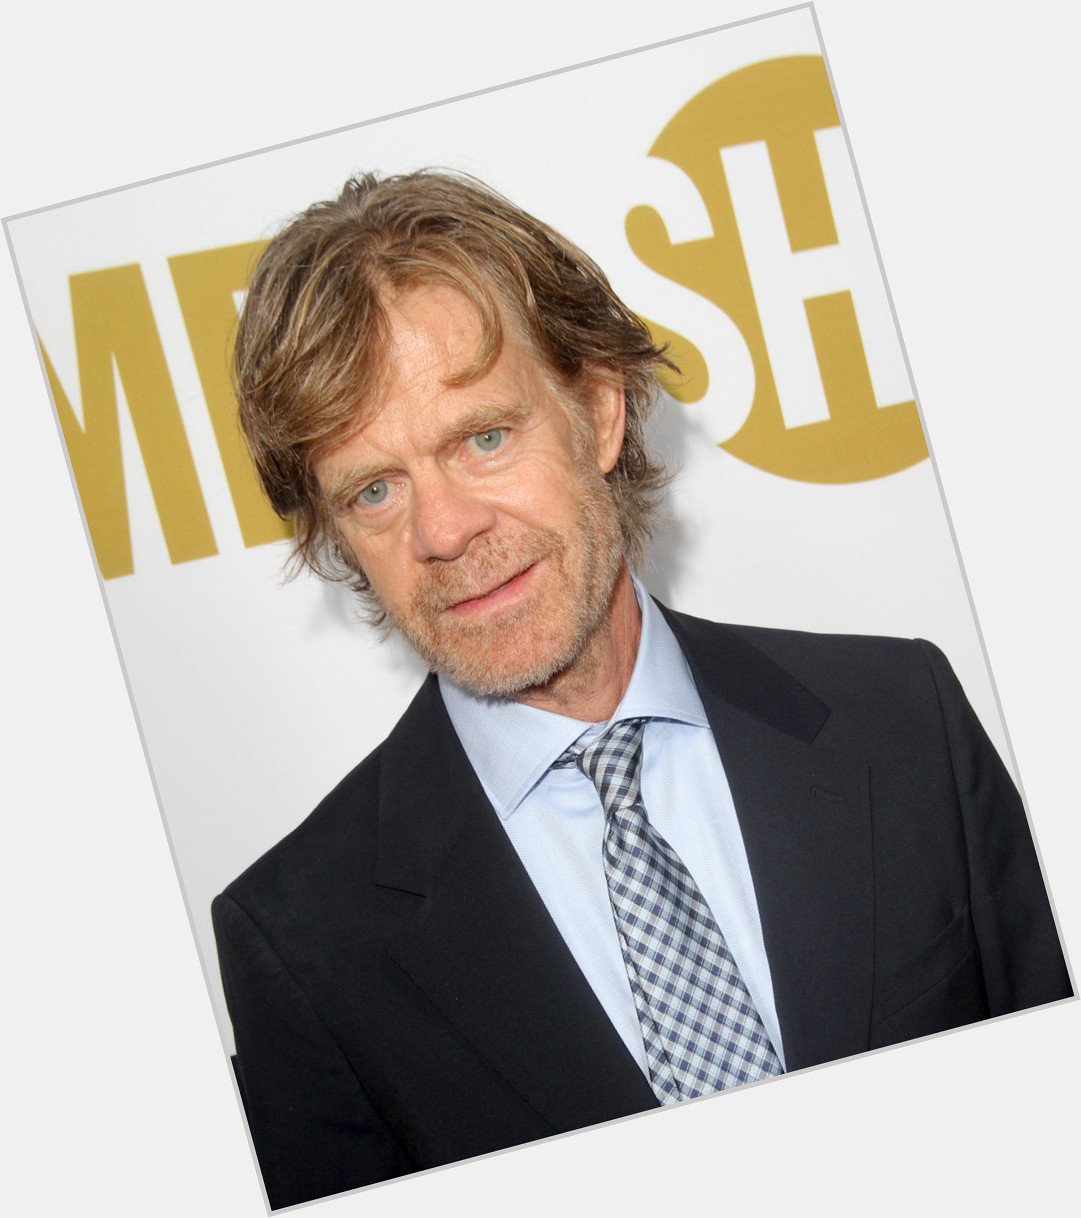 Happy Birthday, William H. Macy
For Disney, he portrayed Railroad Magnate in the  1995 family Western, 